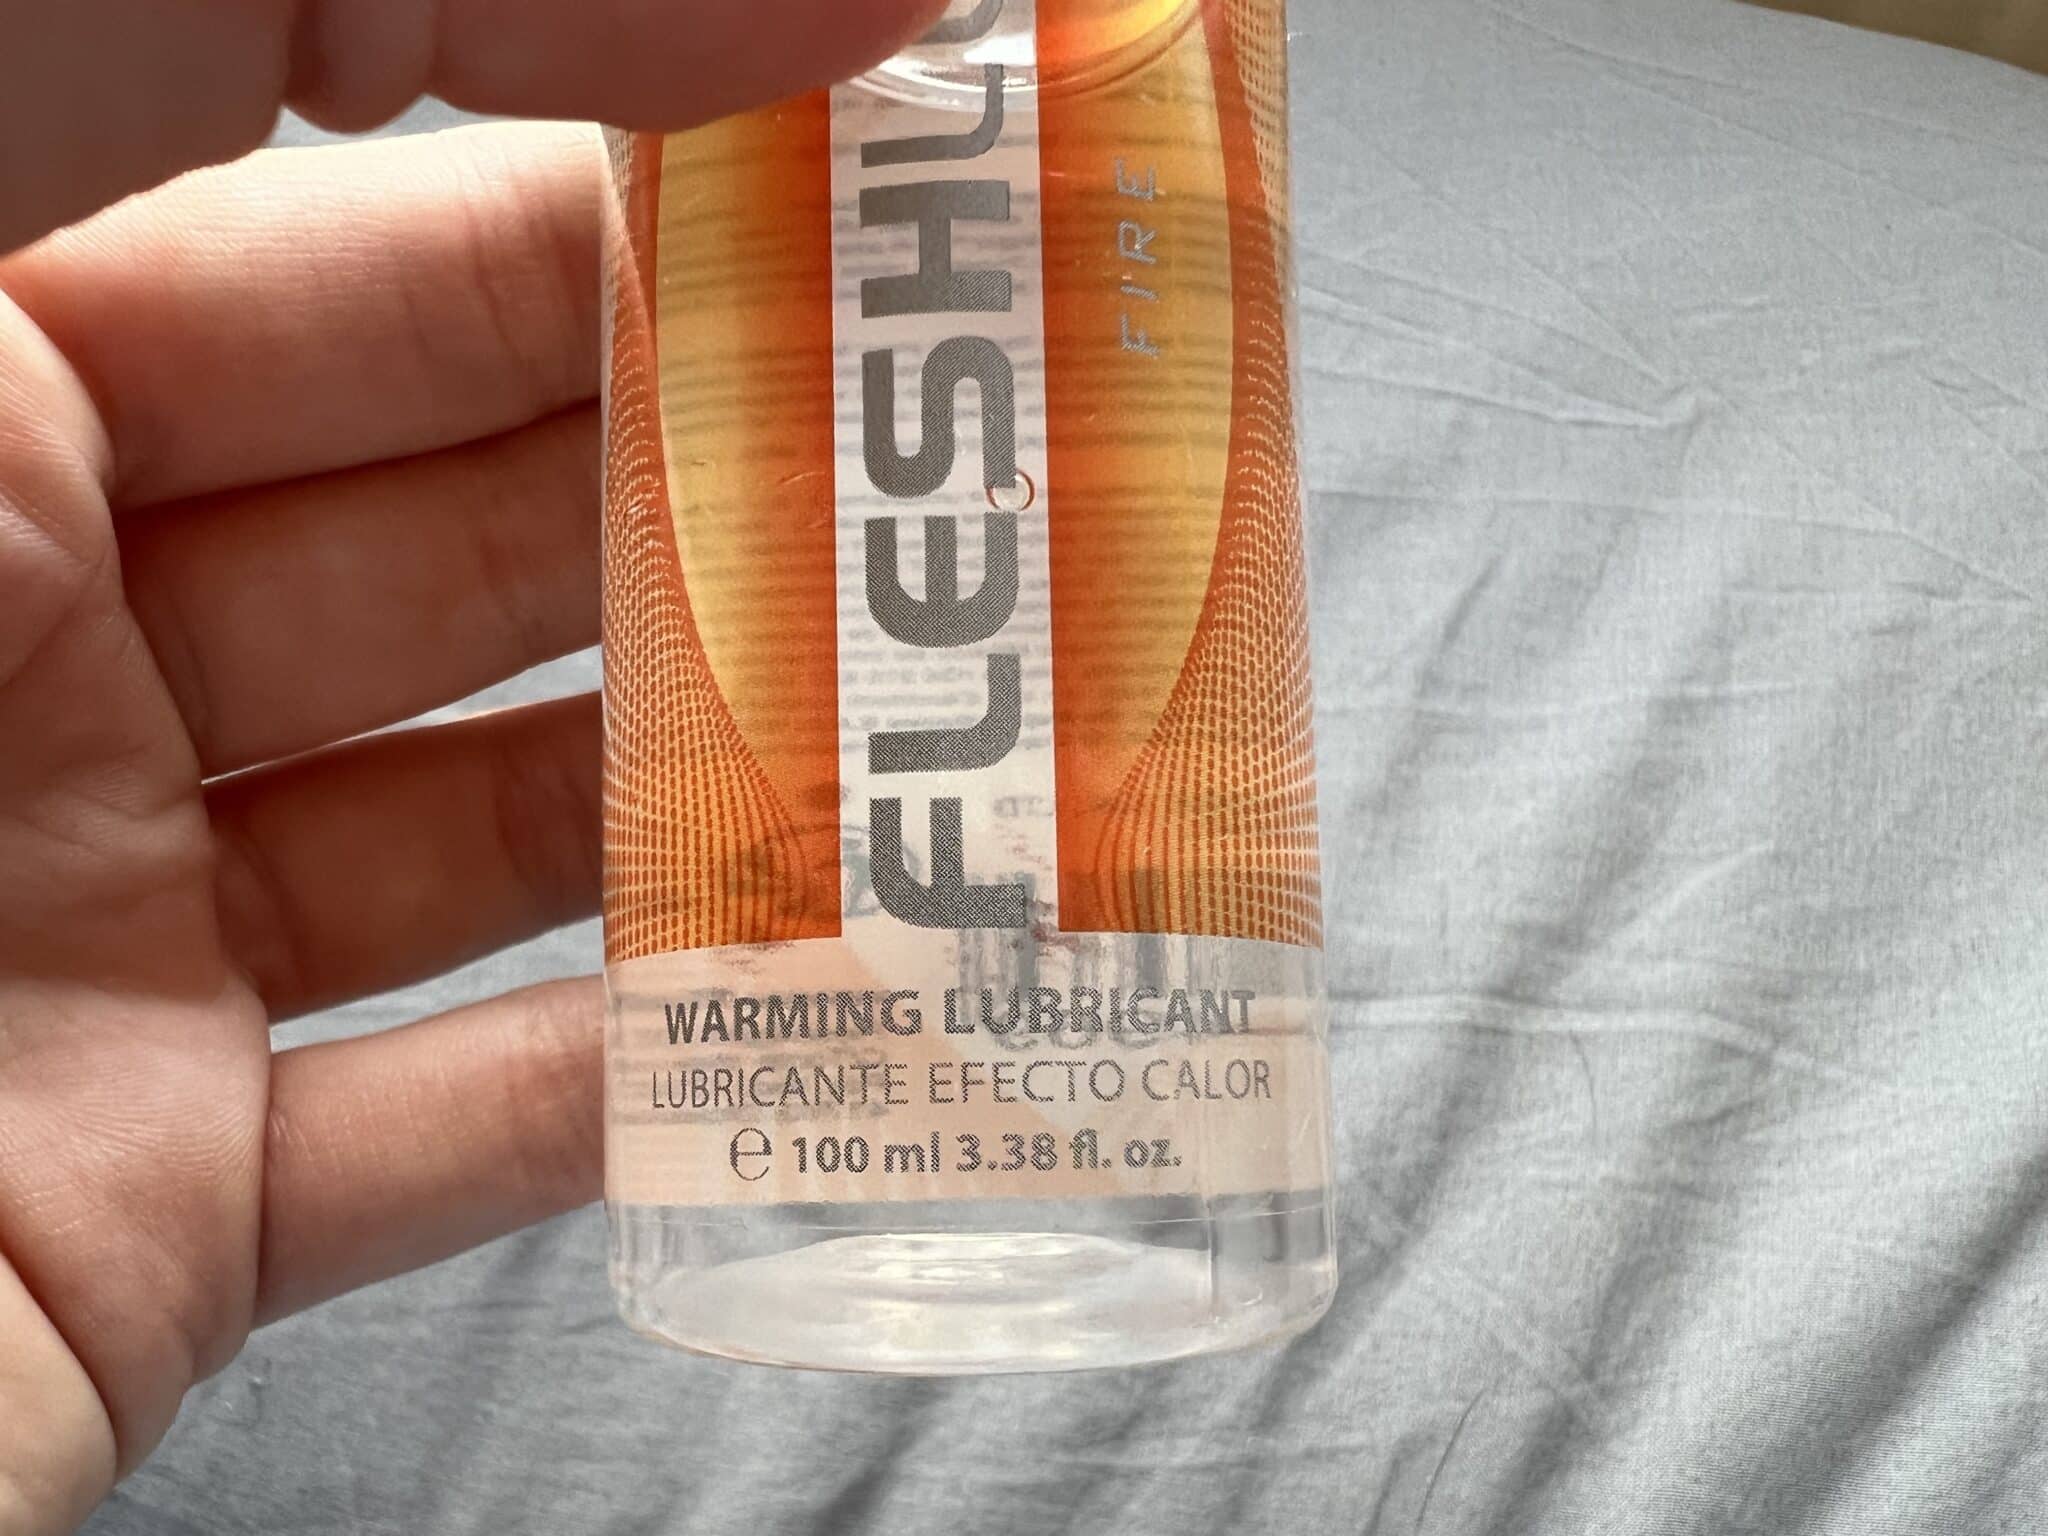 Fleshlube Fire Is the Fleshlube fire Worth the price?